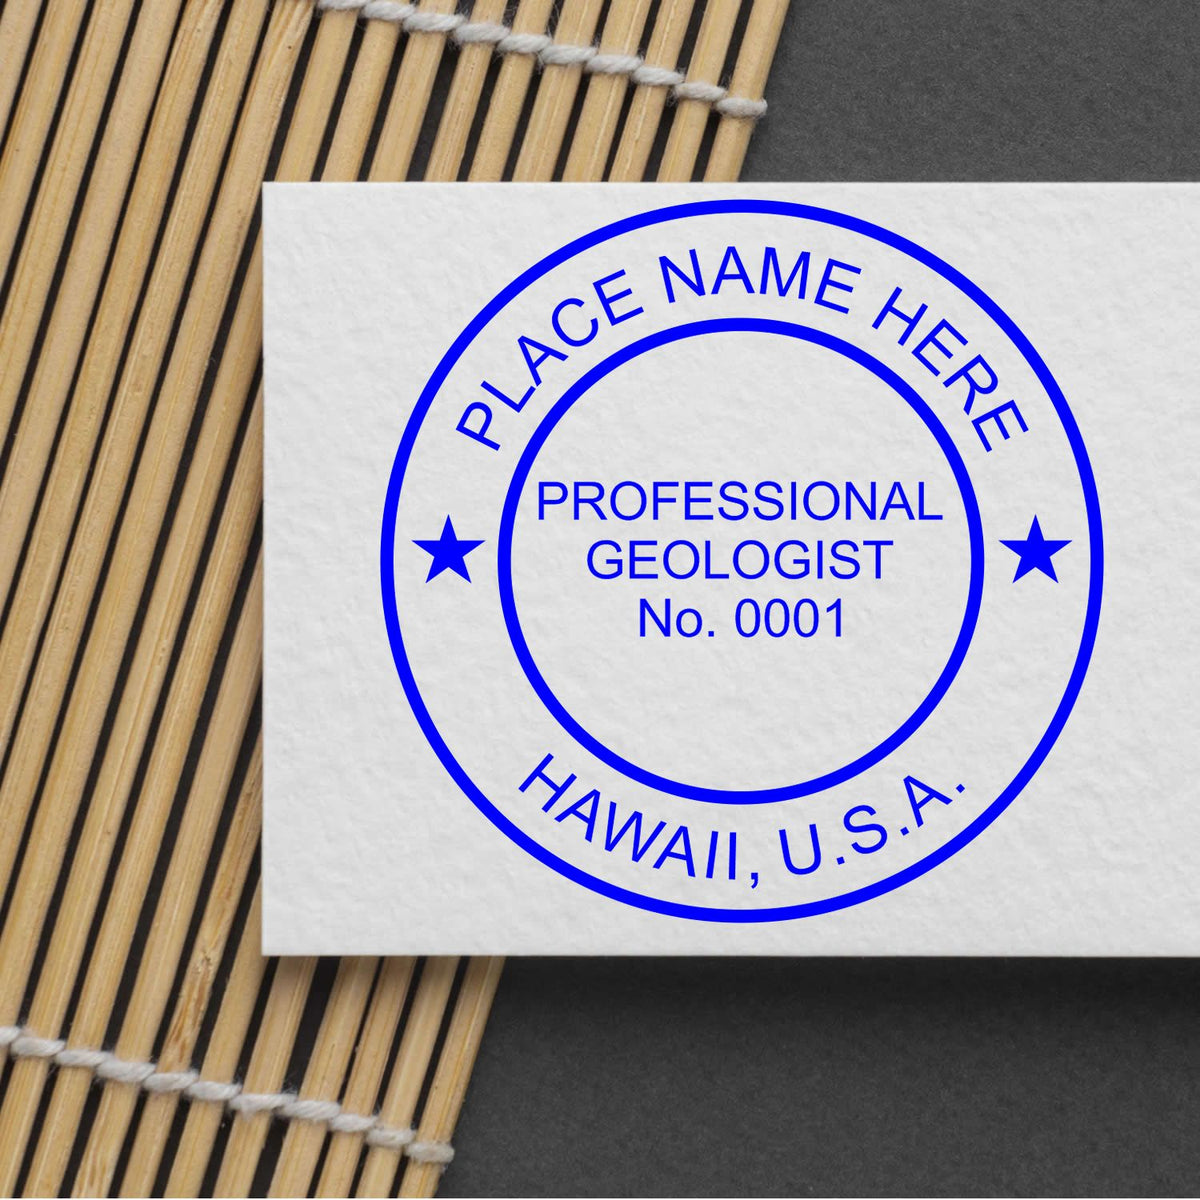 The Slim Pre-Inked Hawaii Professional Geologist Seal Stamp  impression comes to life with a crisp, detailed image stamped on paper - showcasing true professional quality.